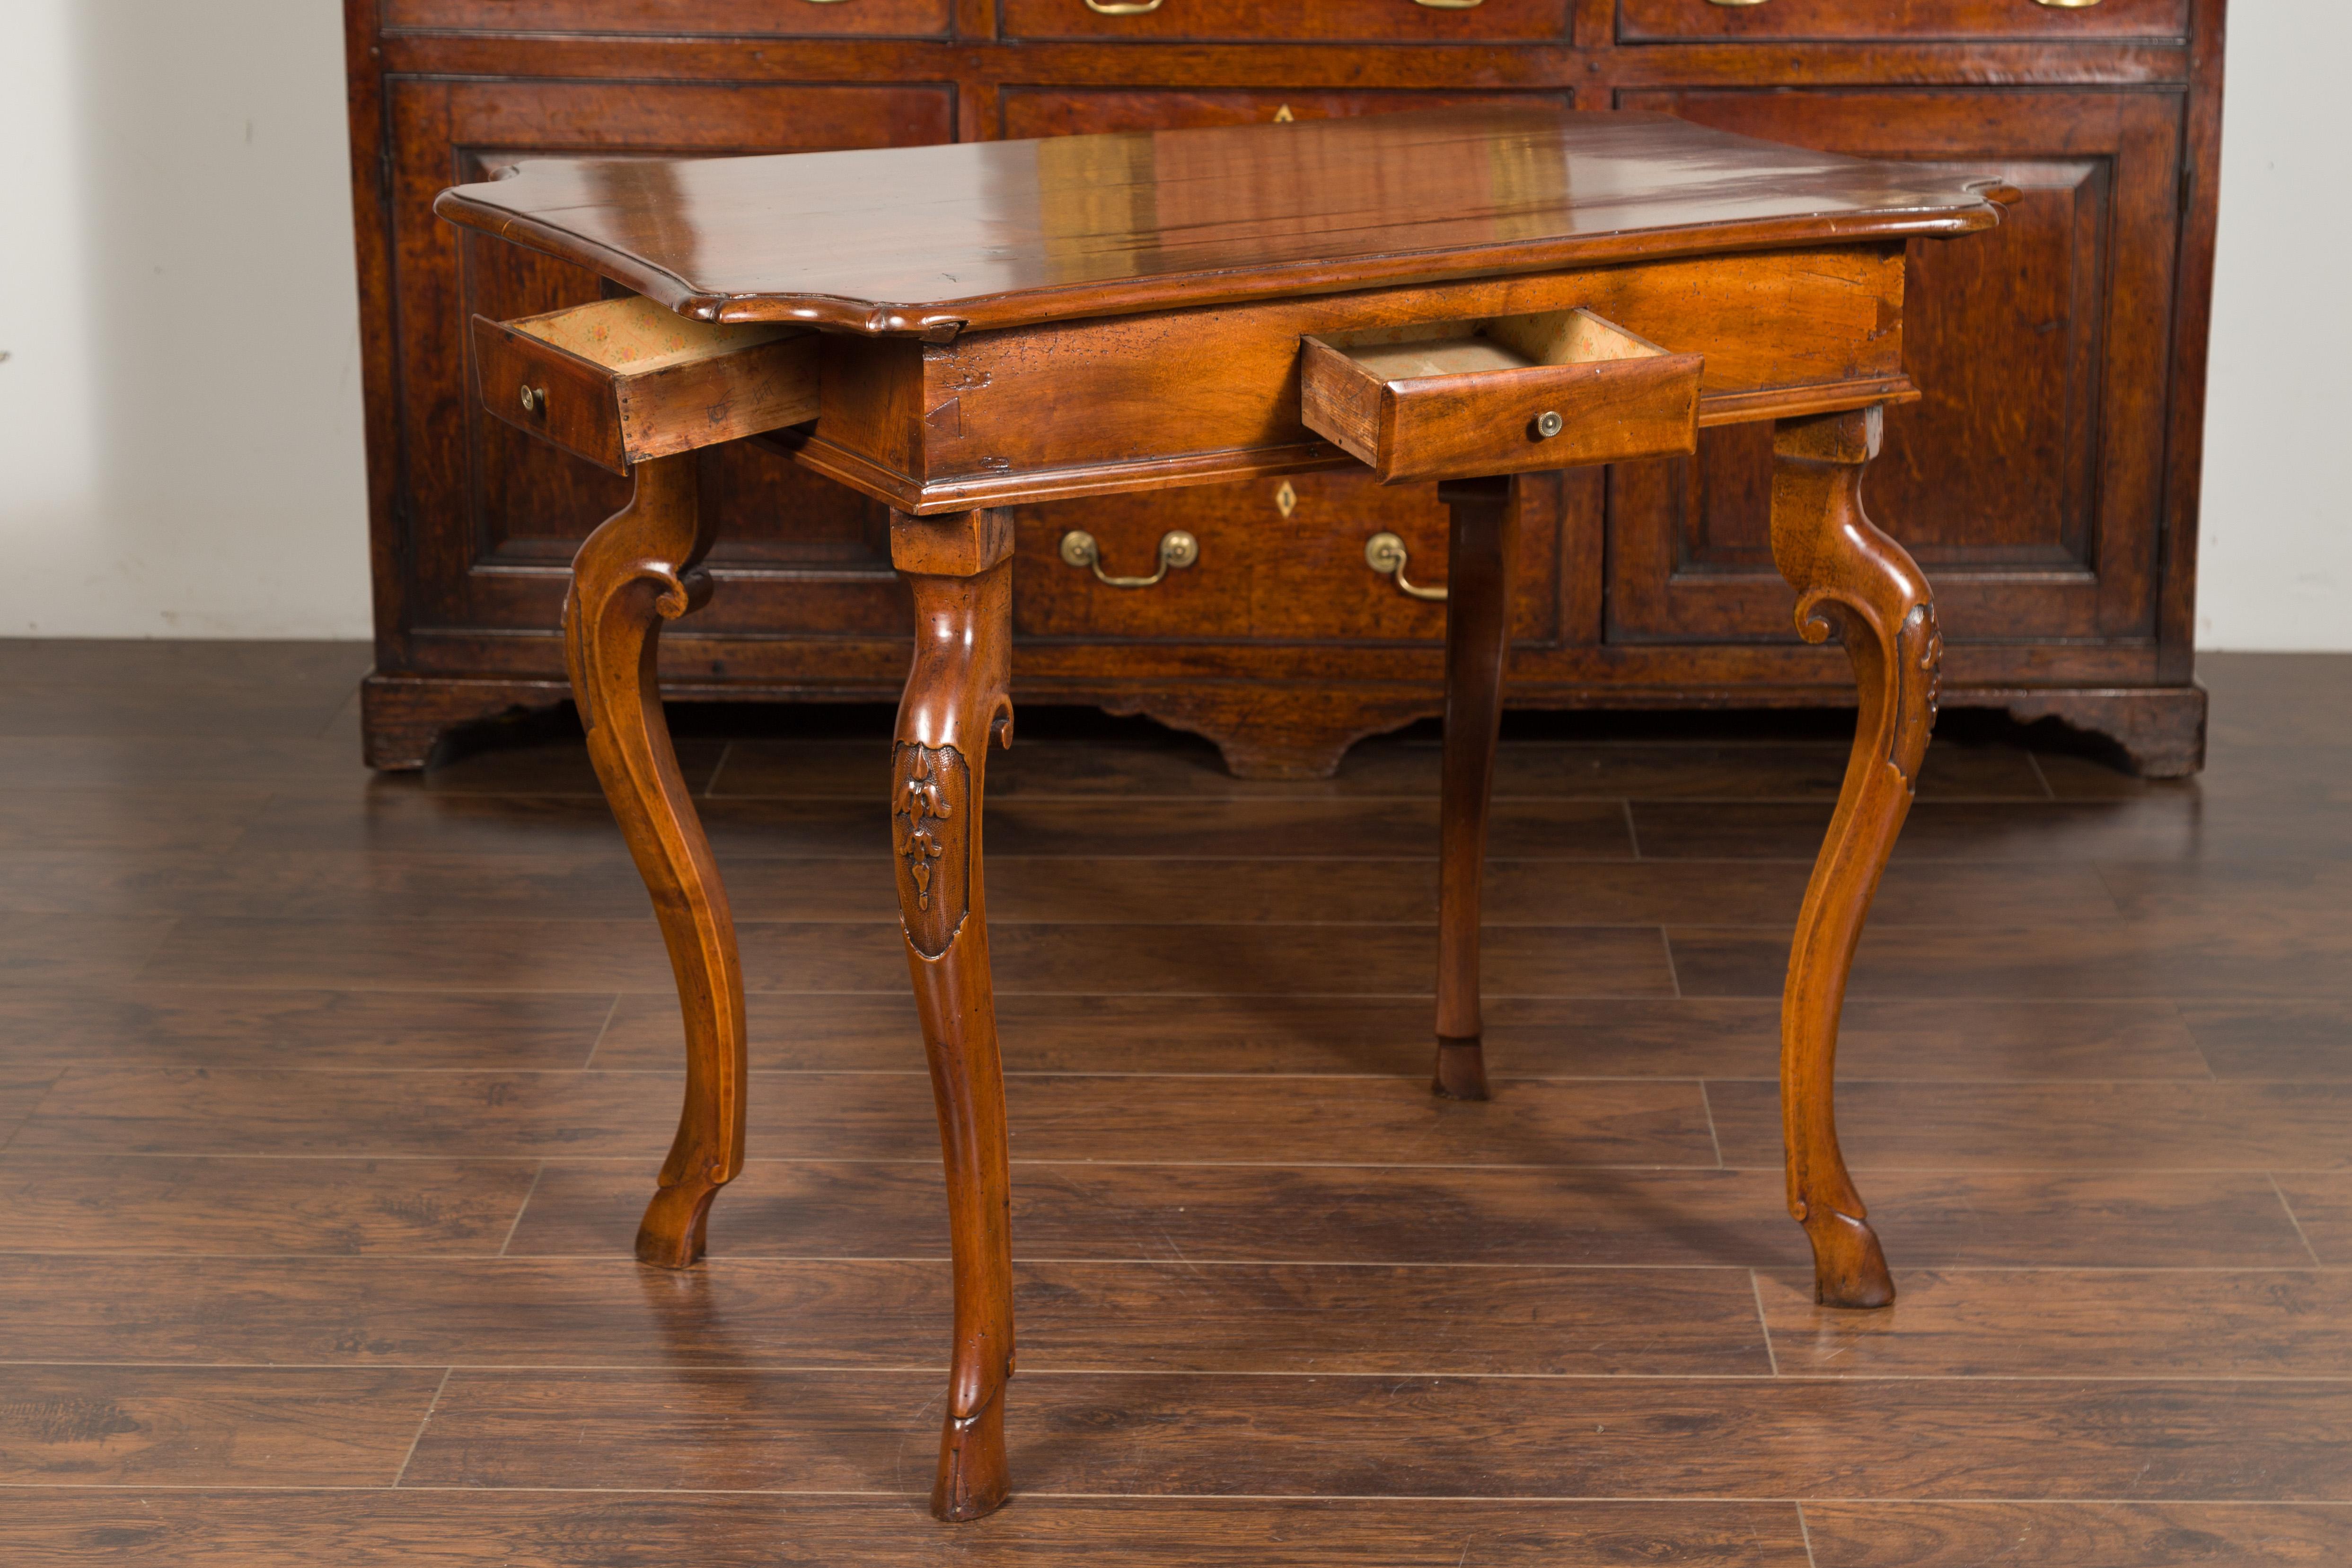 Northern Italian 1720s Régence Walnut Side Table with Four Drawers and Cabrioles 4